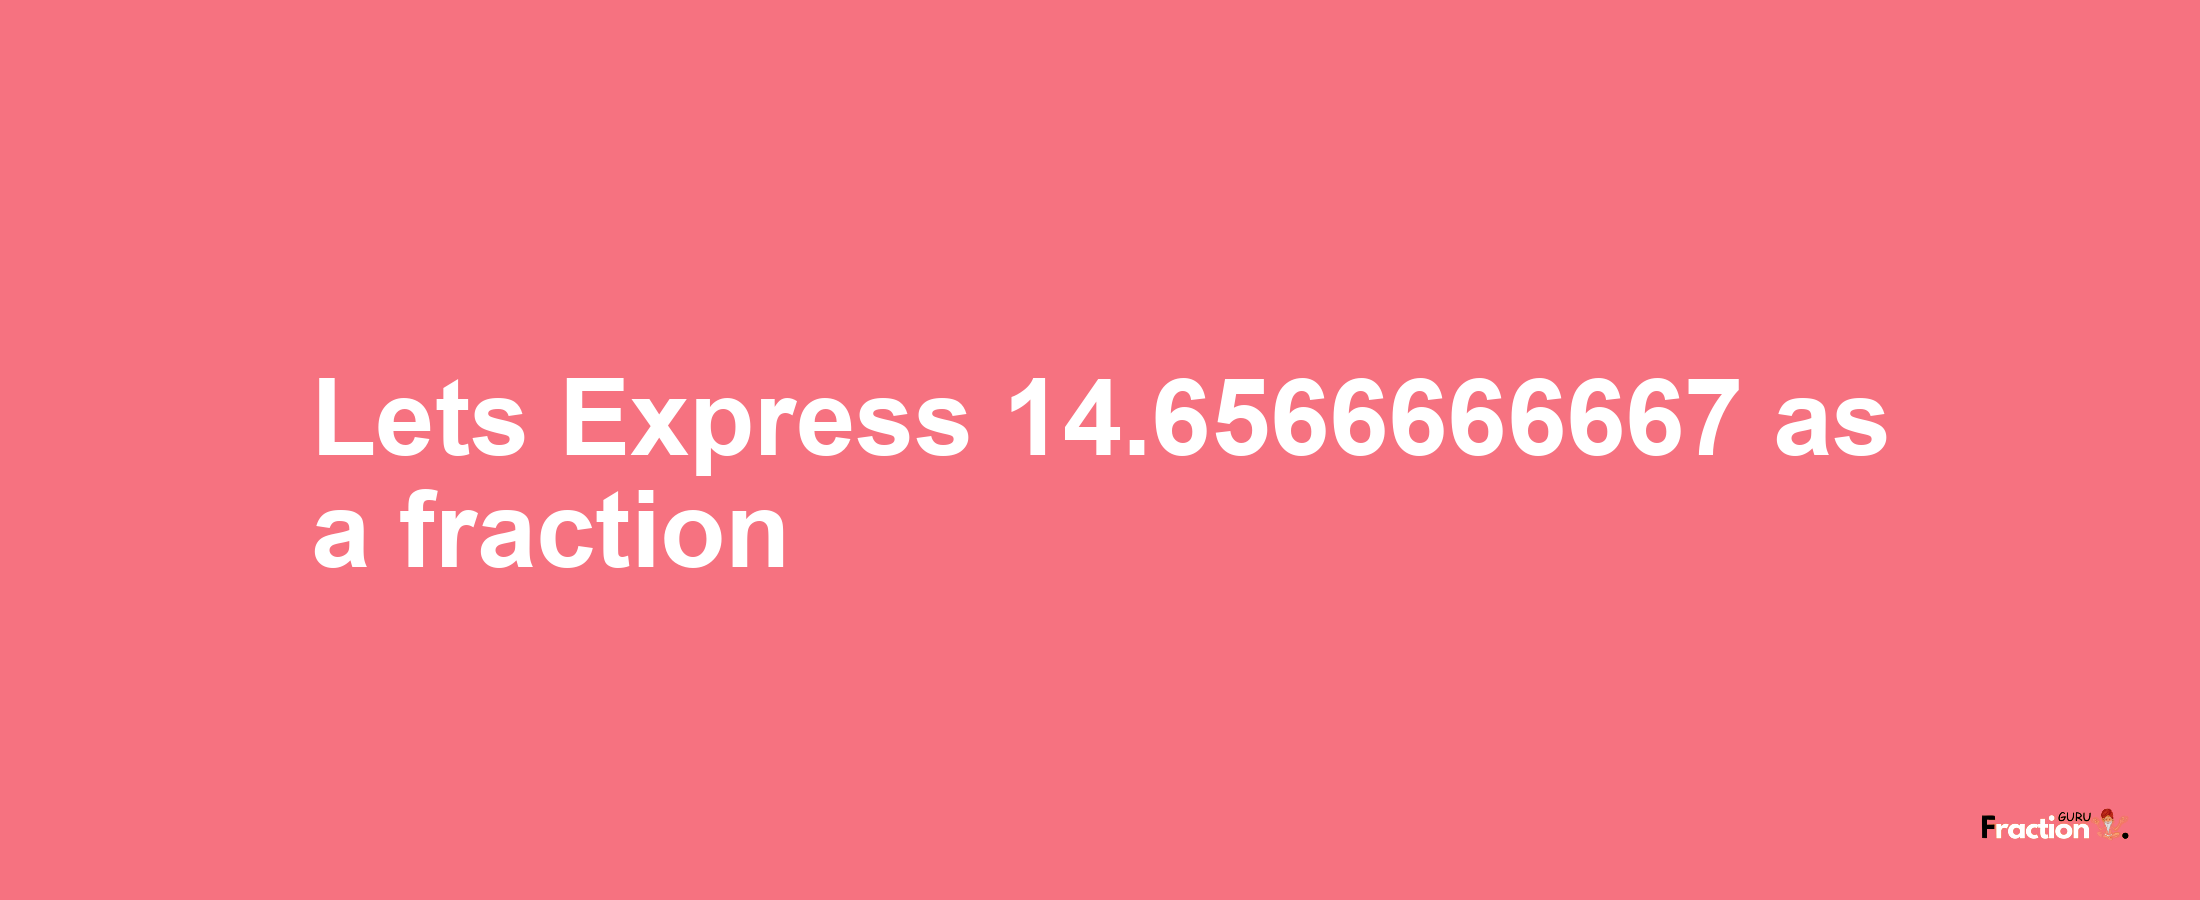 Lets Express 14.6566666667 as afraction